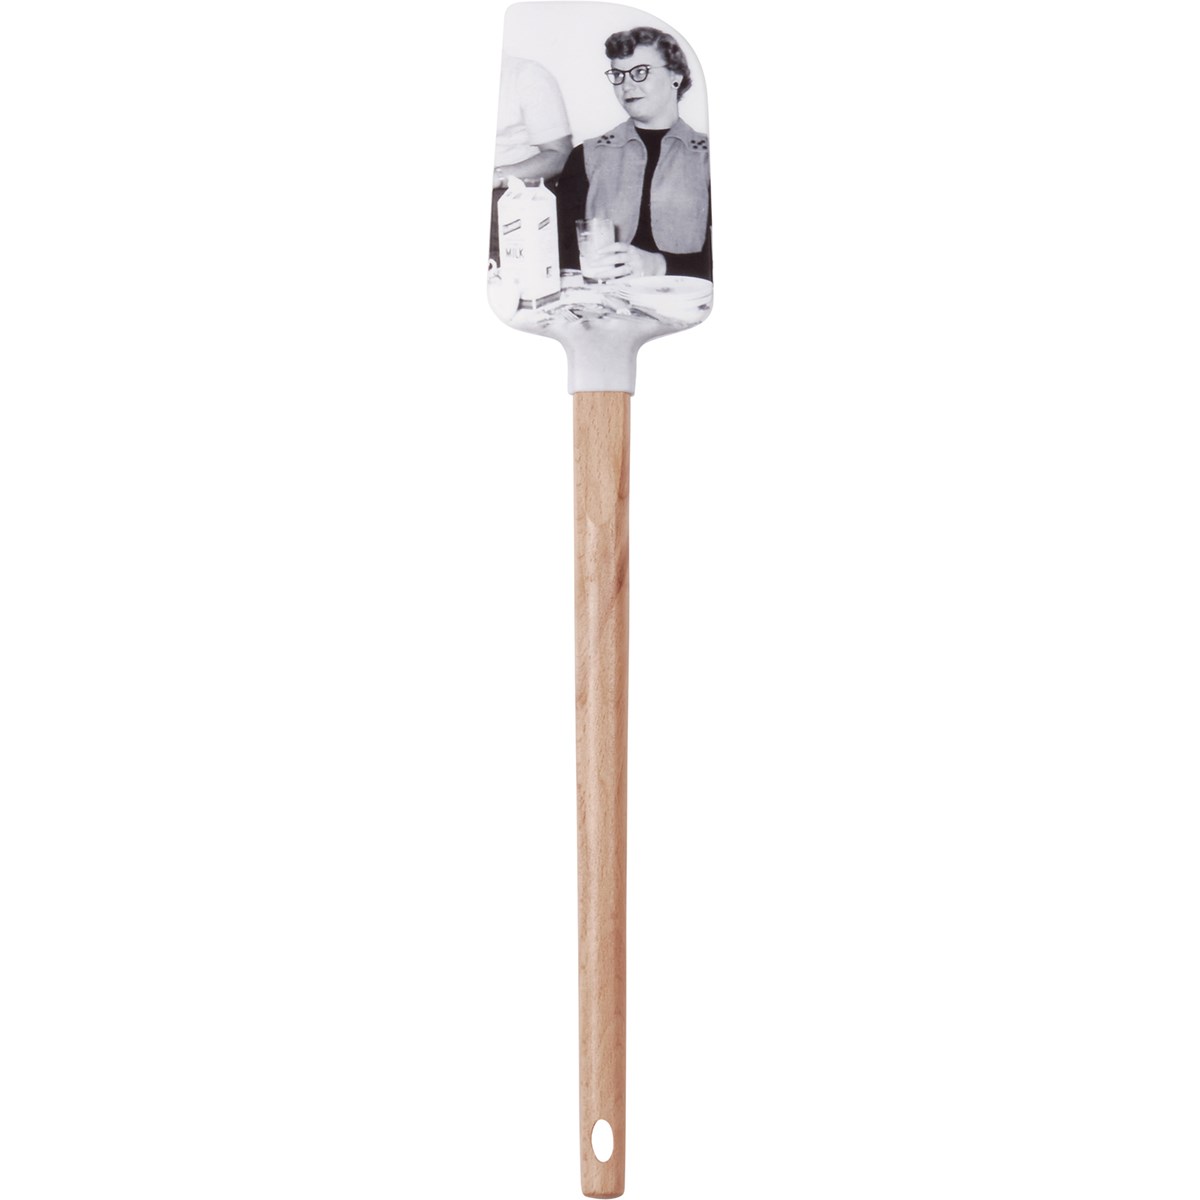 Spatula - If You Were Milk I'd Sniff You First - 2.50" x 13" x 0.50" - Silicone, Wood